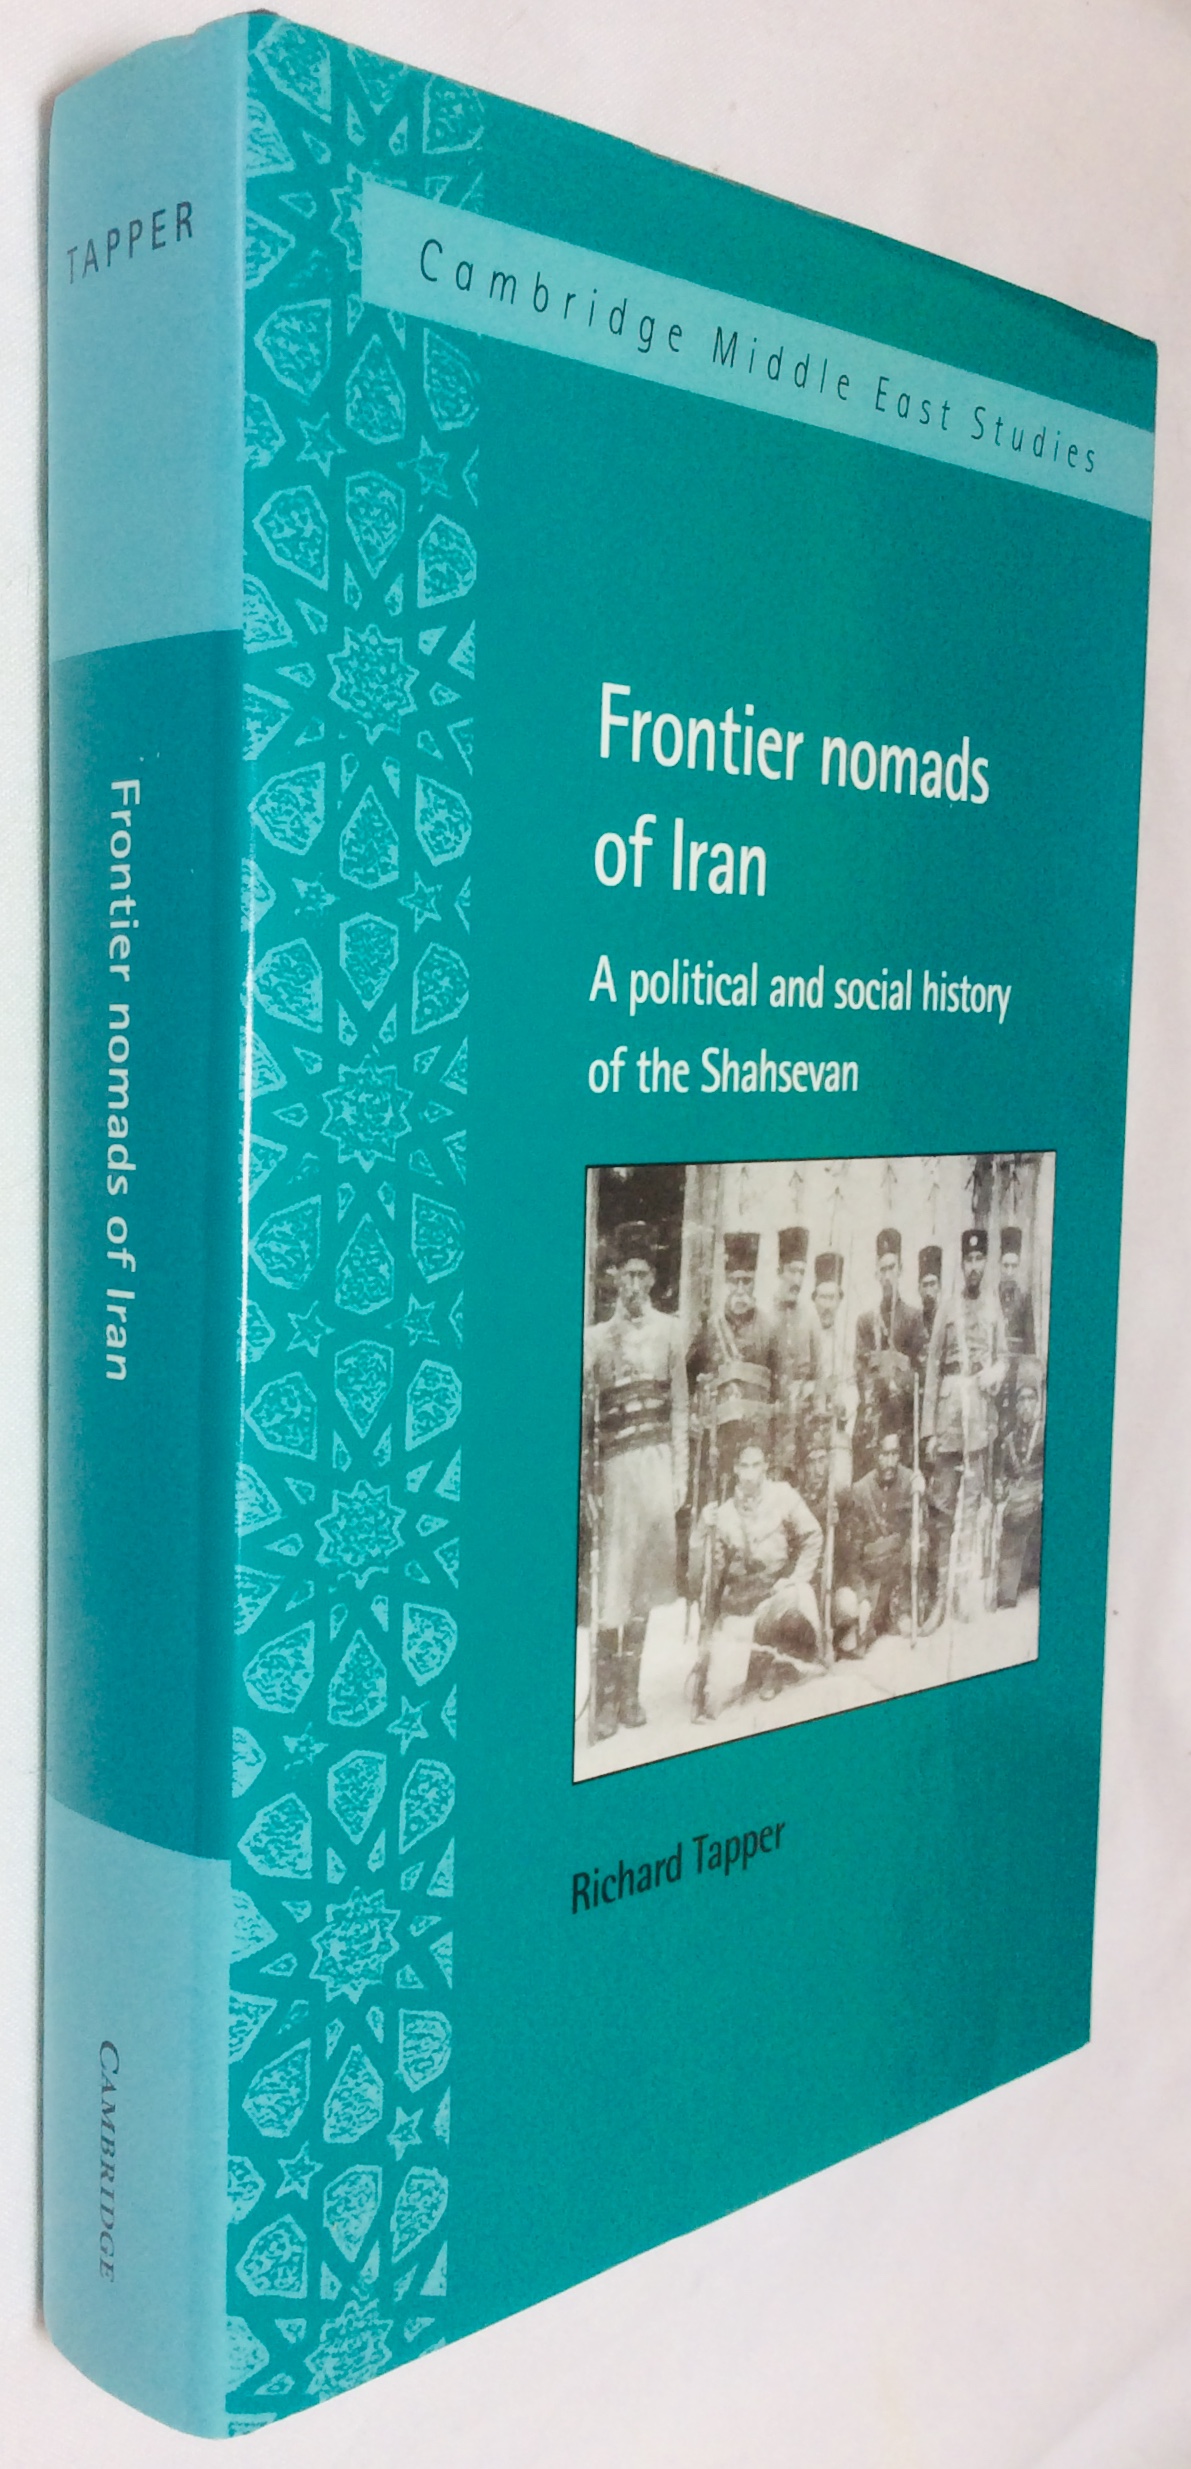 Frontier Nomads of Iran: A Political and Social History of the Shahsevan (Cambridge Middle East Studies, Band 7)